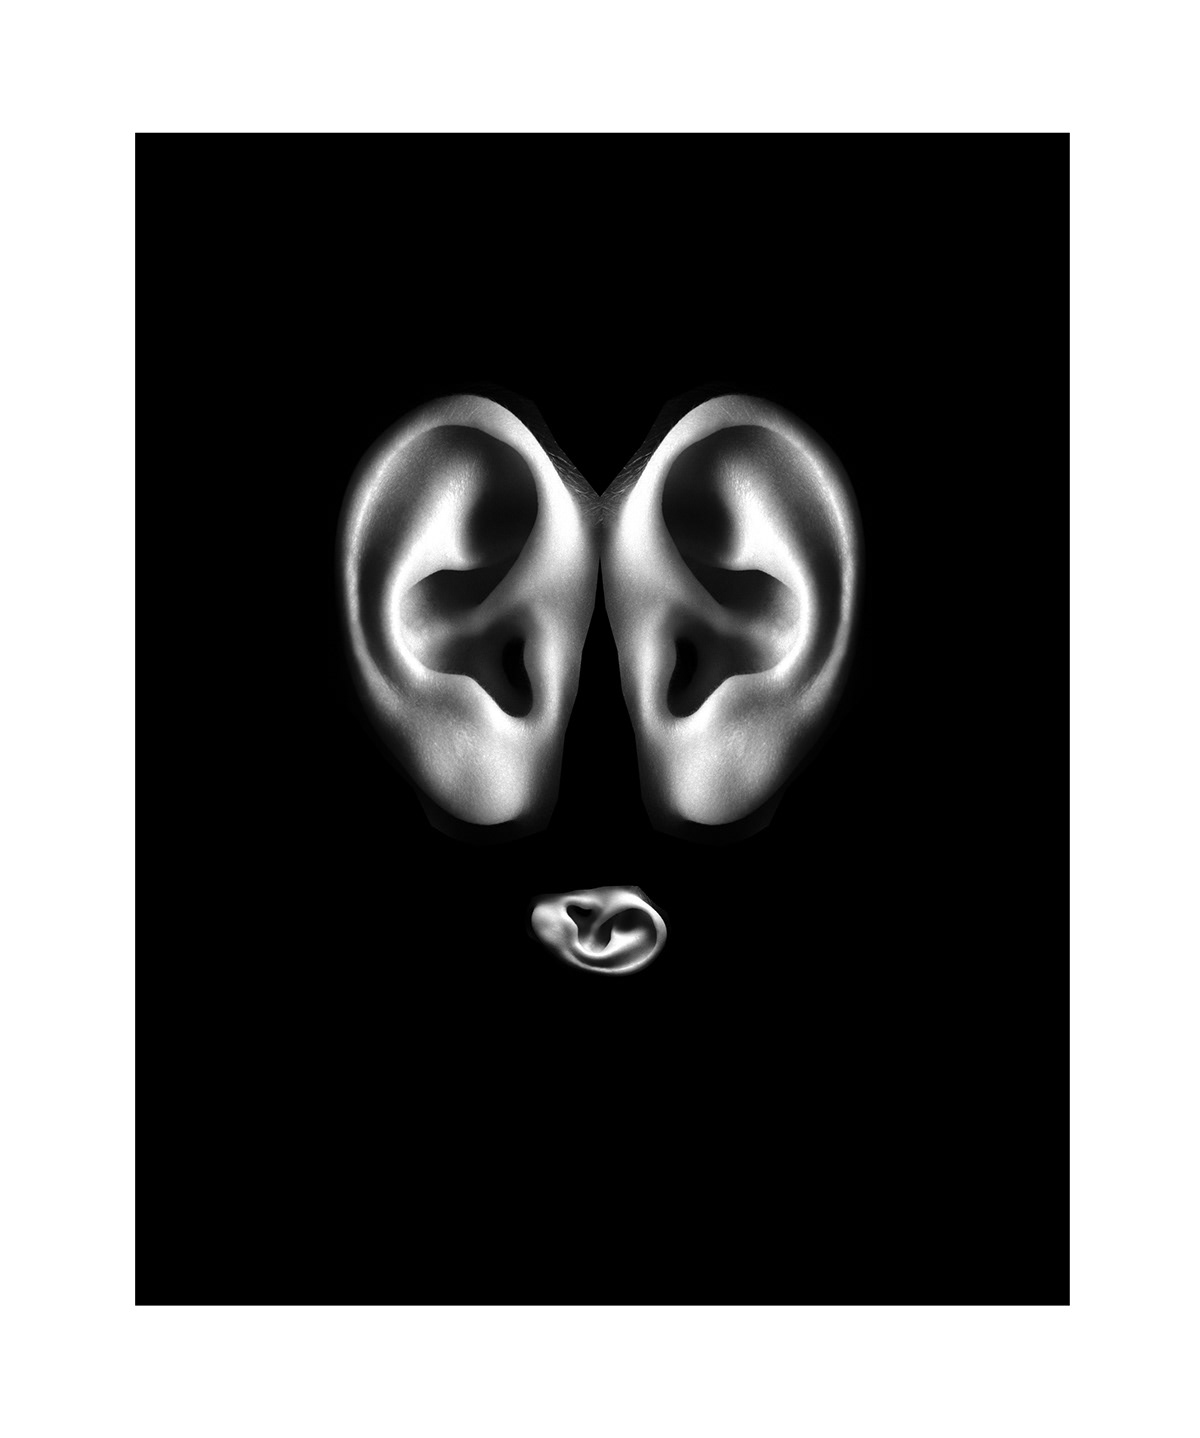 abstrac ear graphic